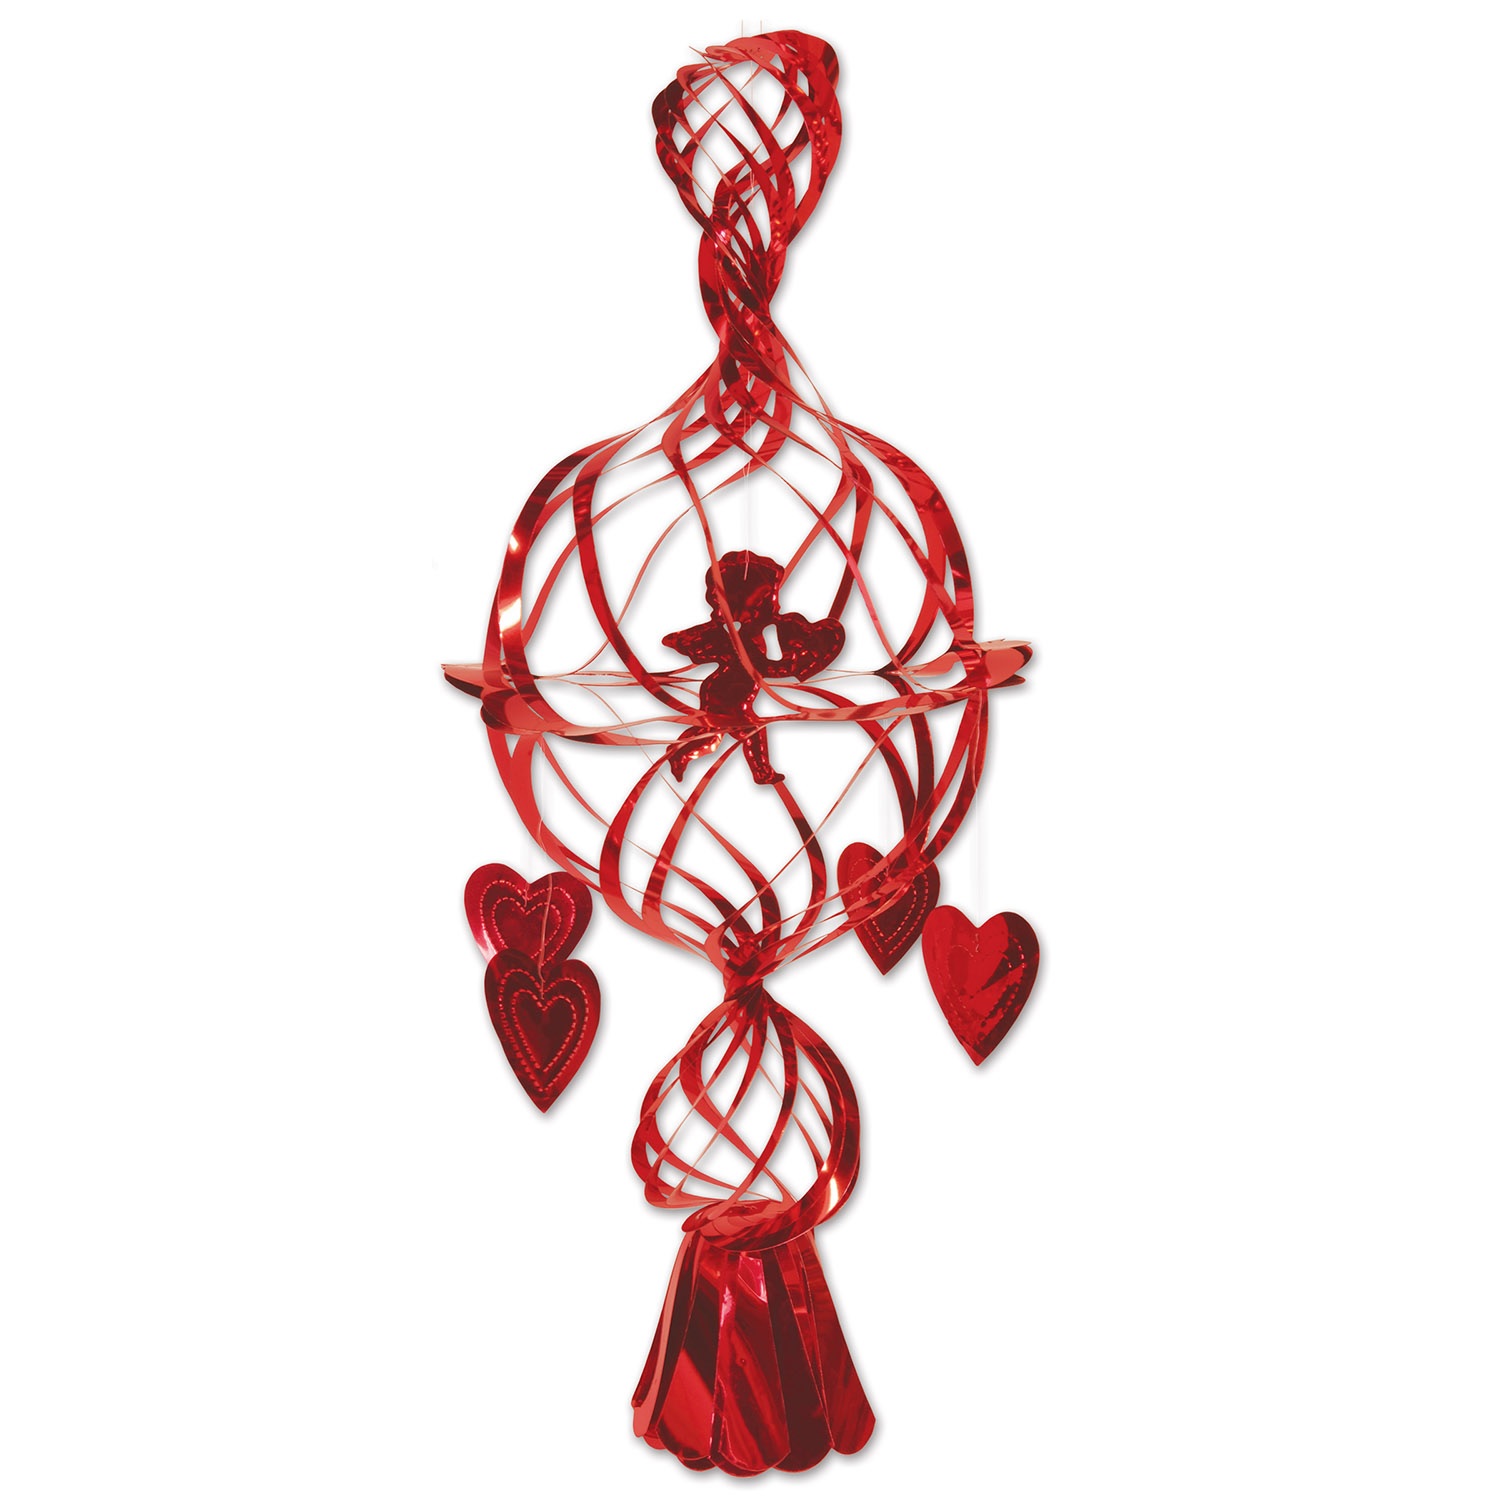 Beistle Club Pack of 12 Red Valentine's Day Metallic Cupid and Hearts Hanging Decorations 29"